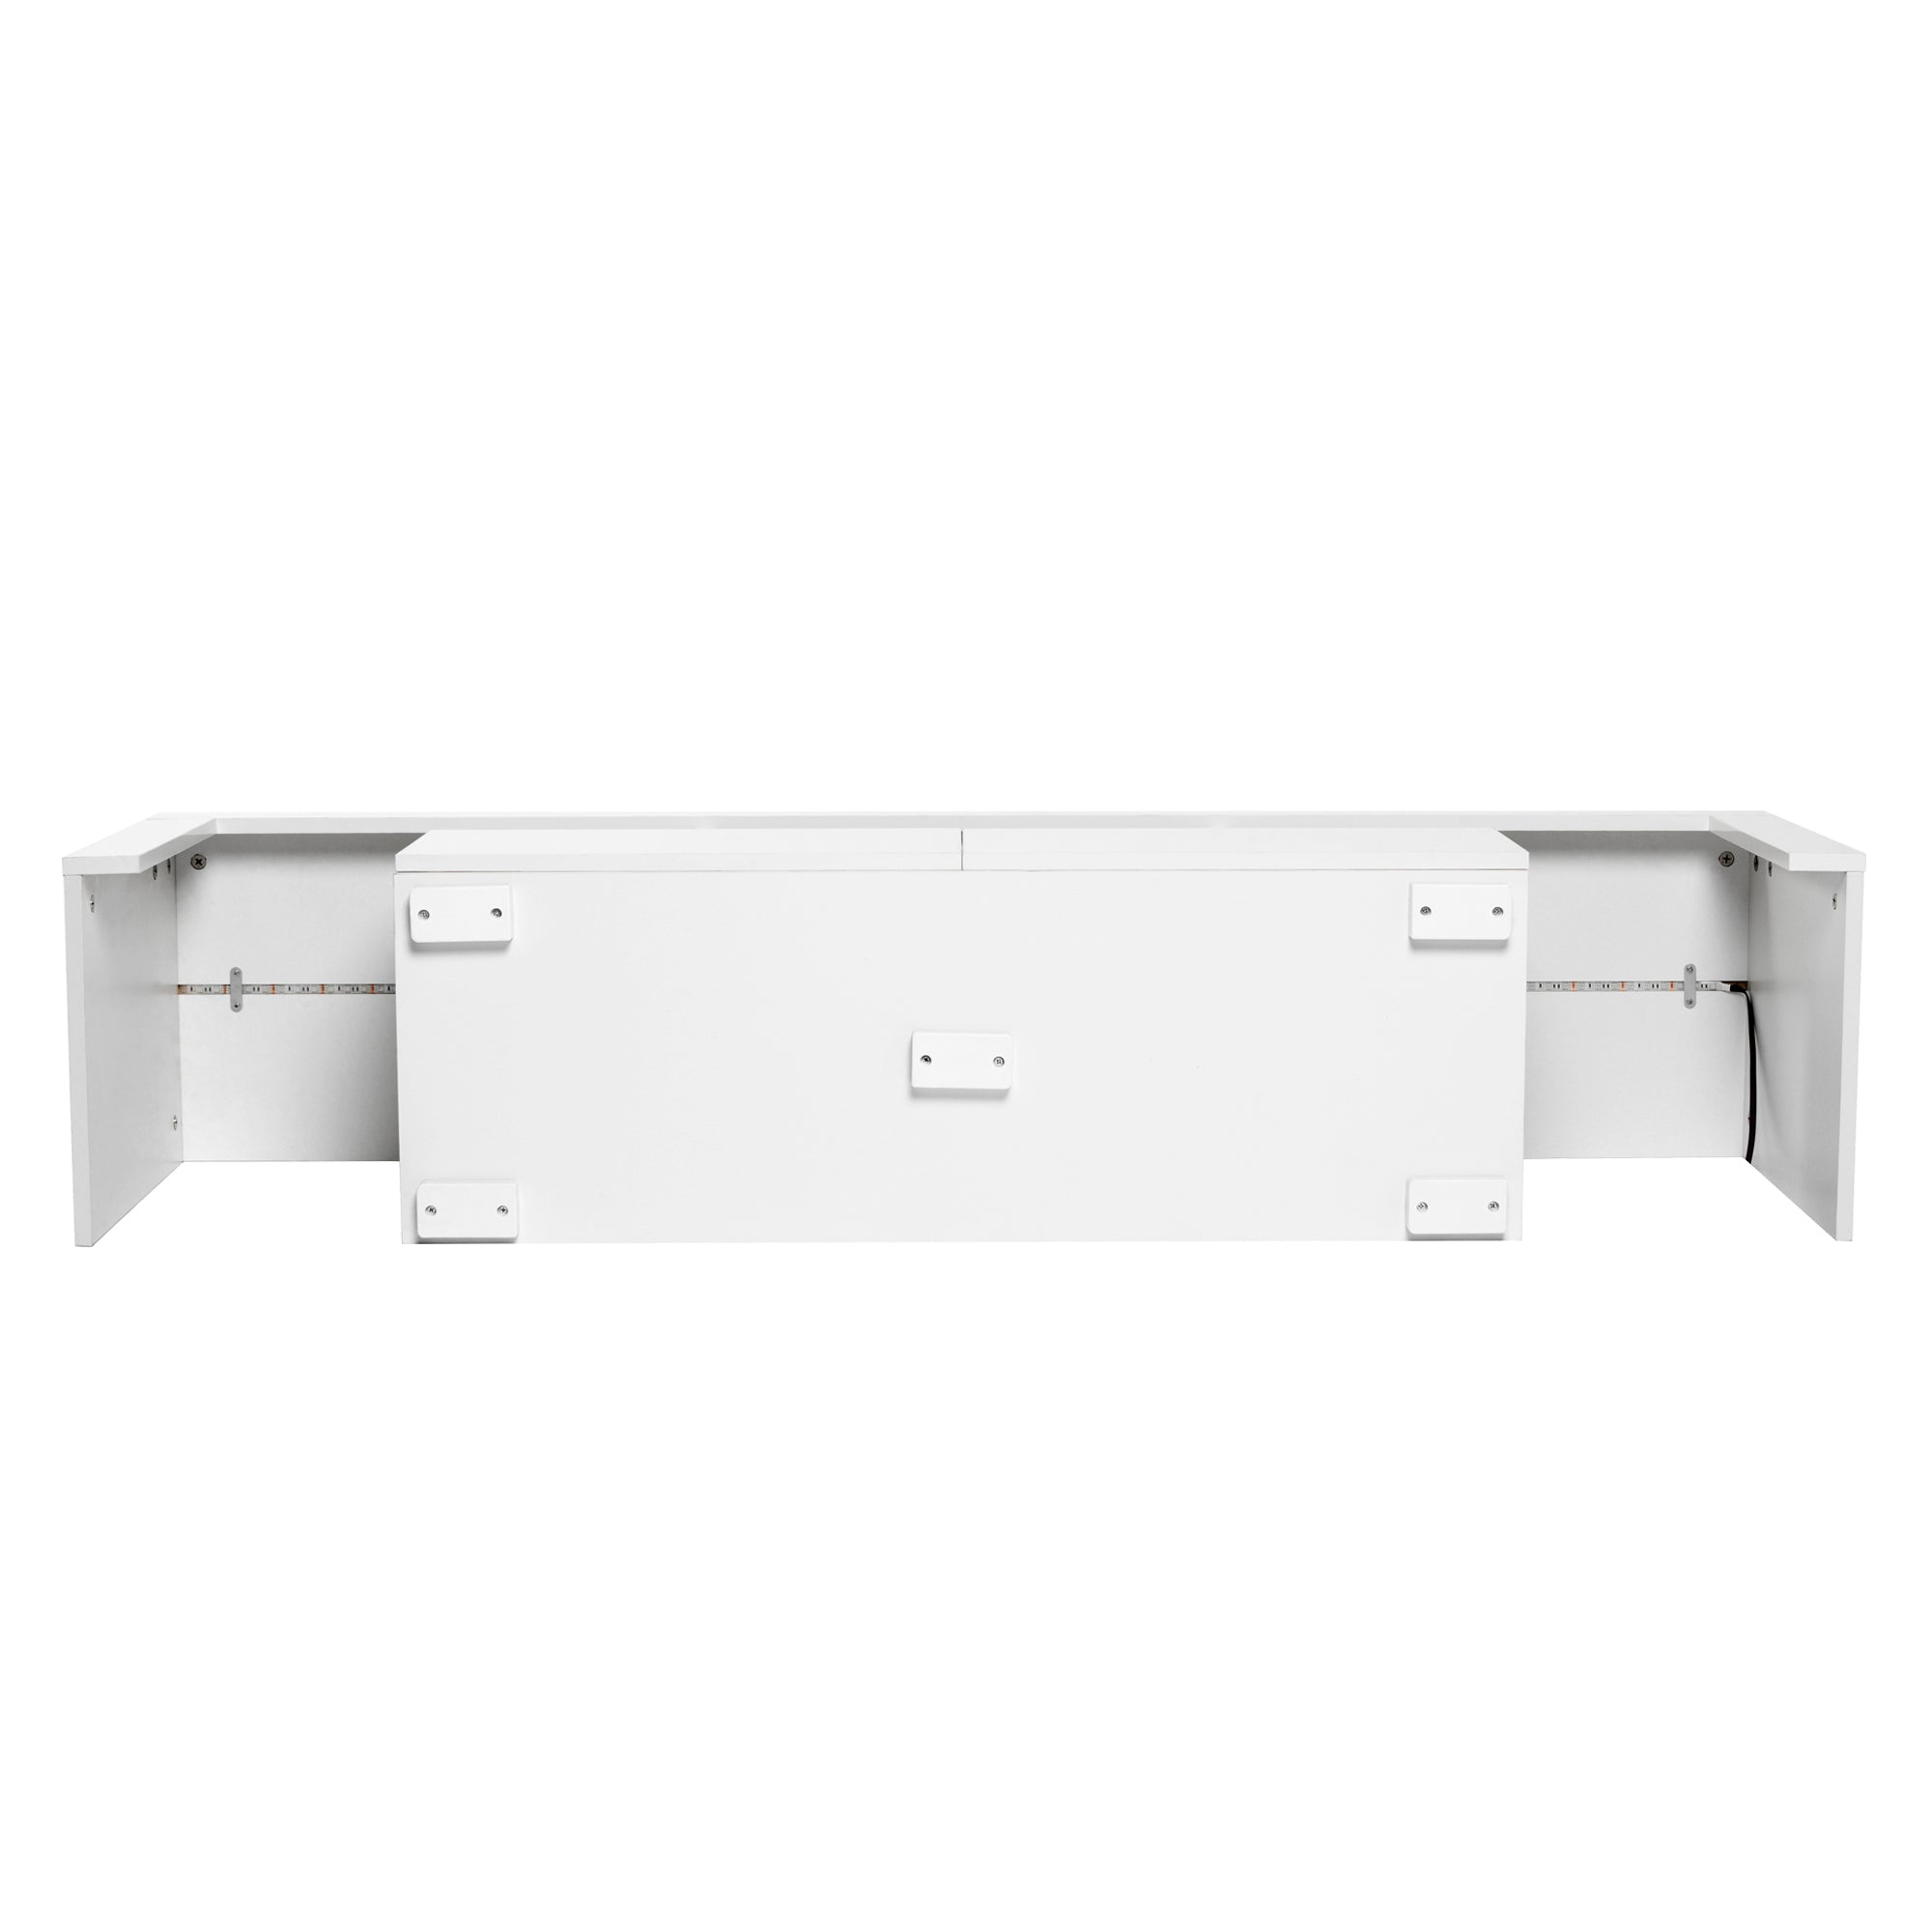 Modern TV Stand with LED Lights (White)